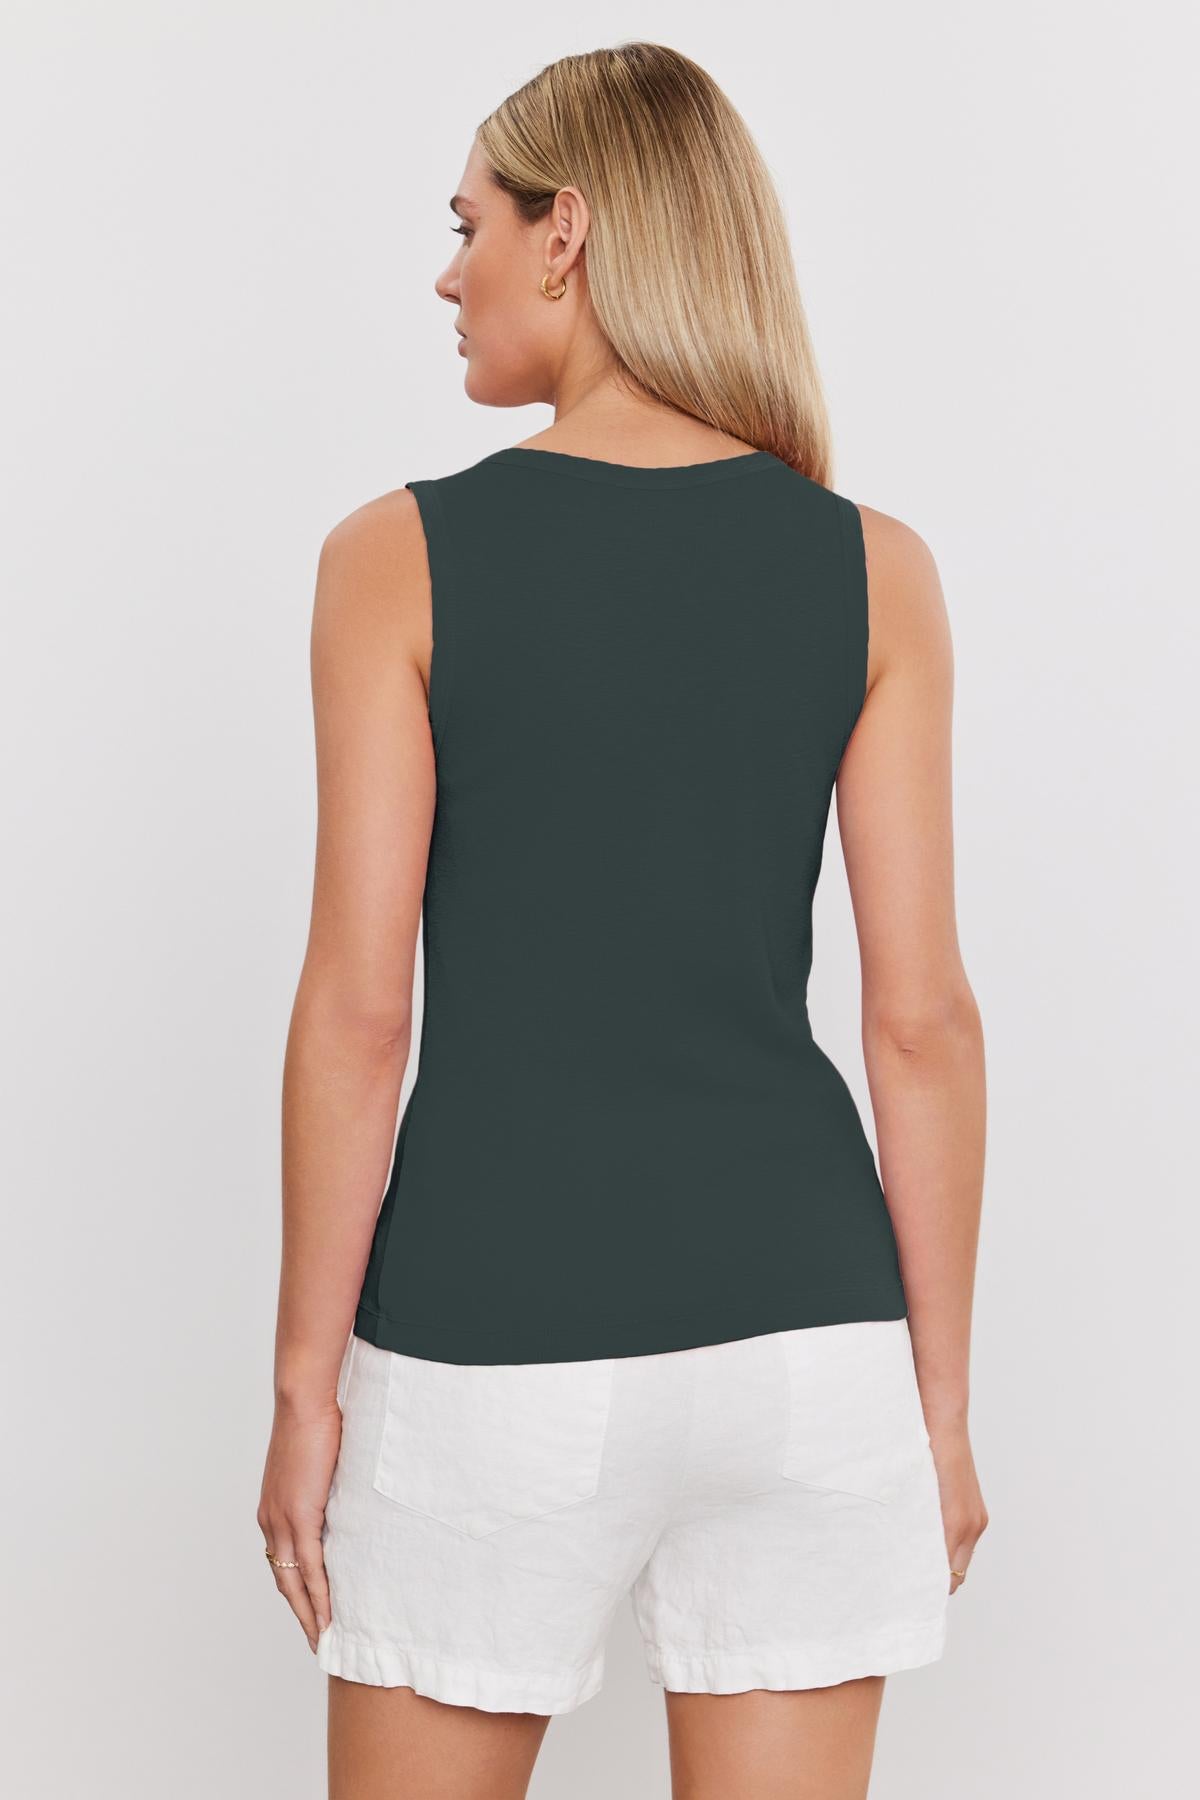 A person with long hair is seen from the back wearing a soft textured, sleeveless dark green MAXIE RIBBED TANK TOP by Velvet by Graham & Spencer and white shorts.-37241154502849